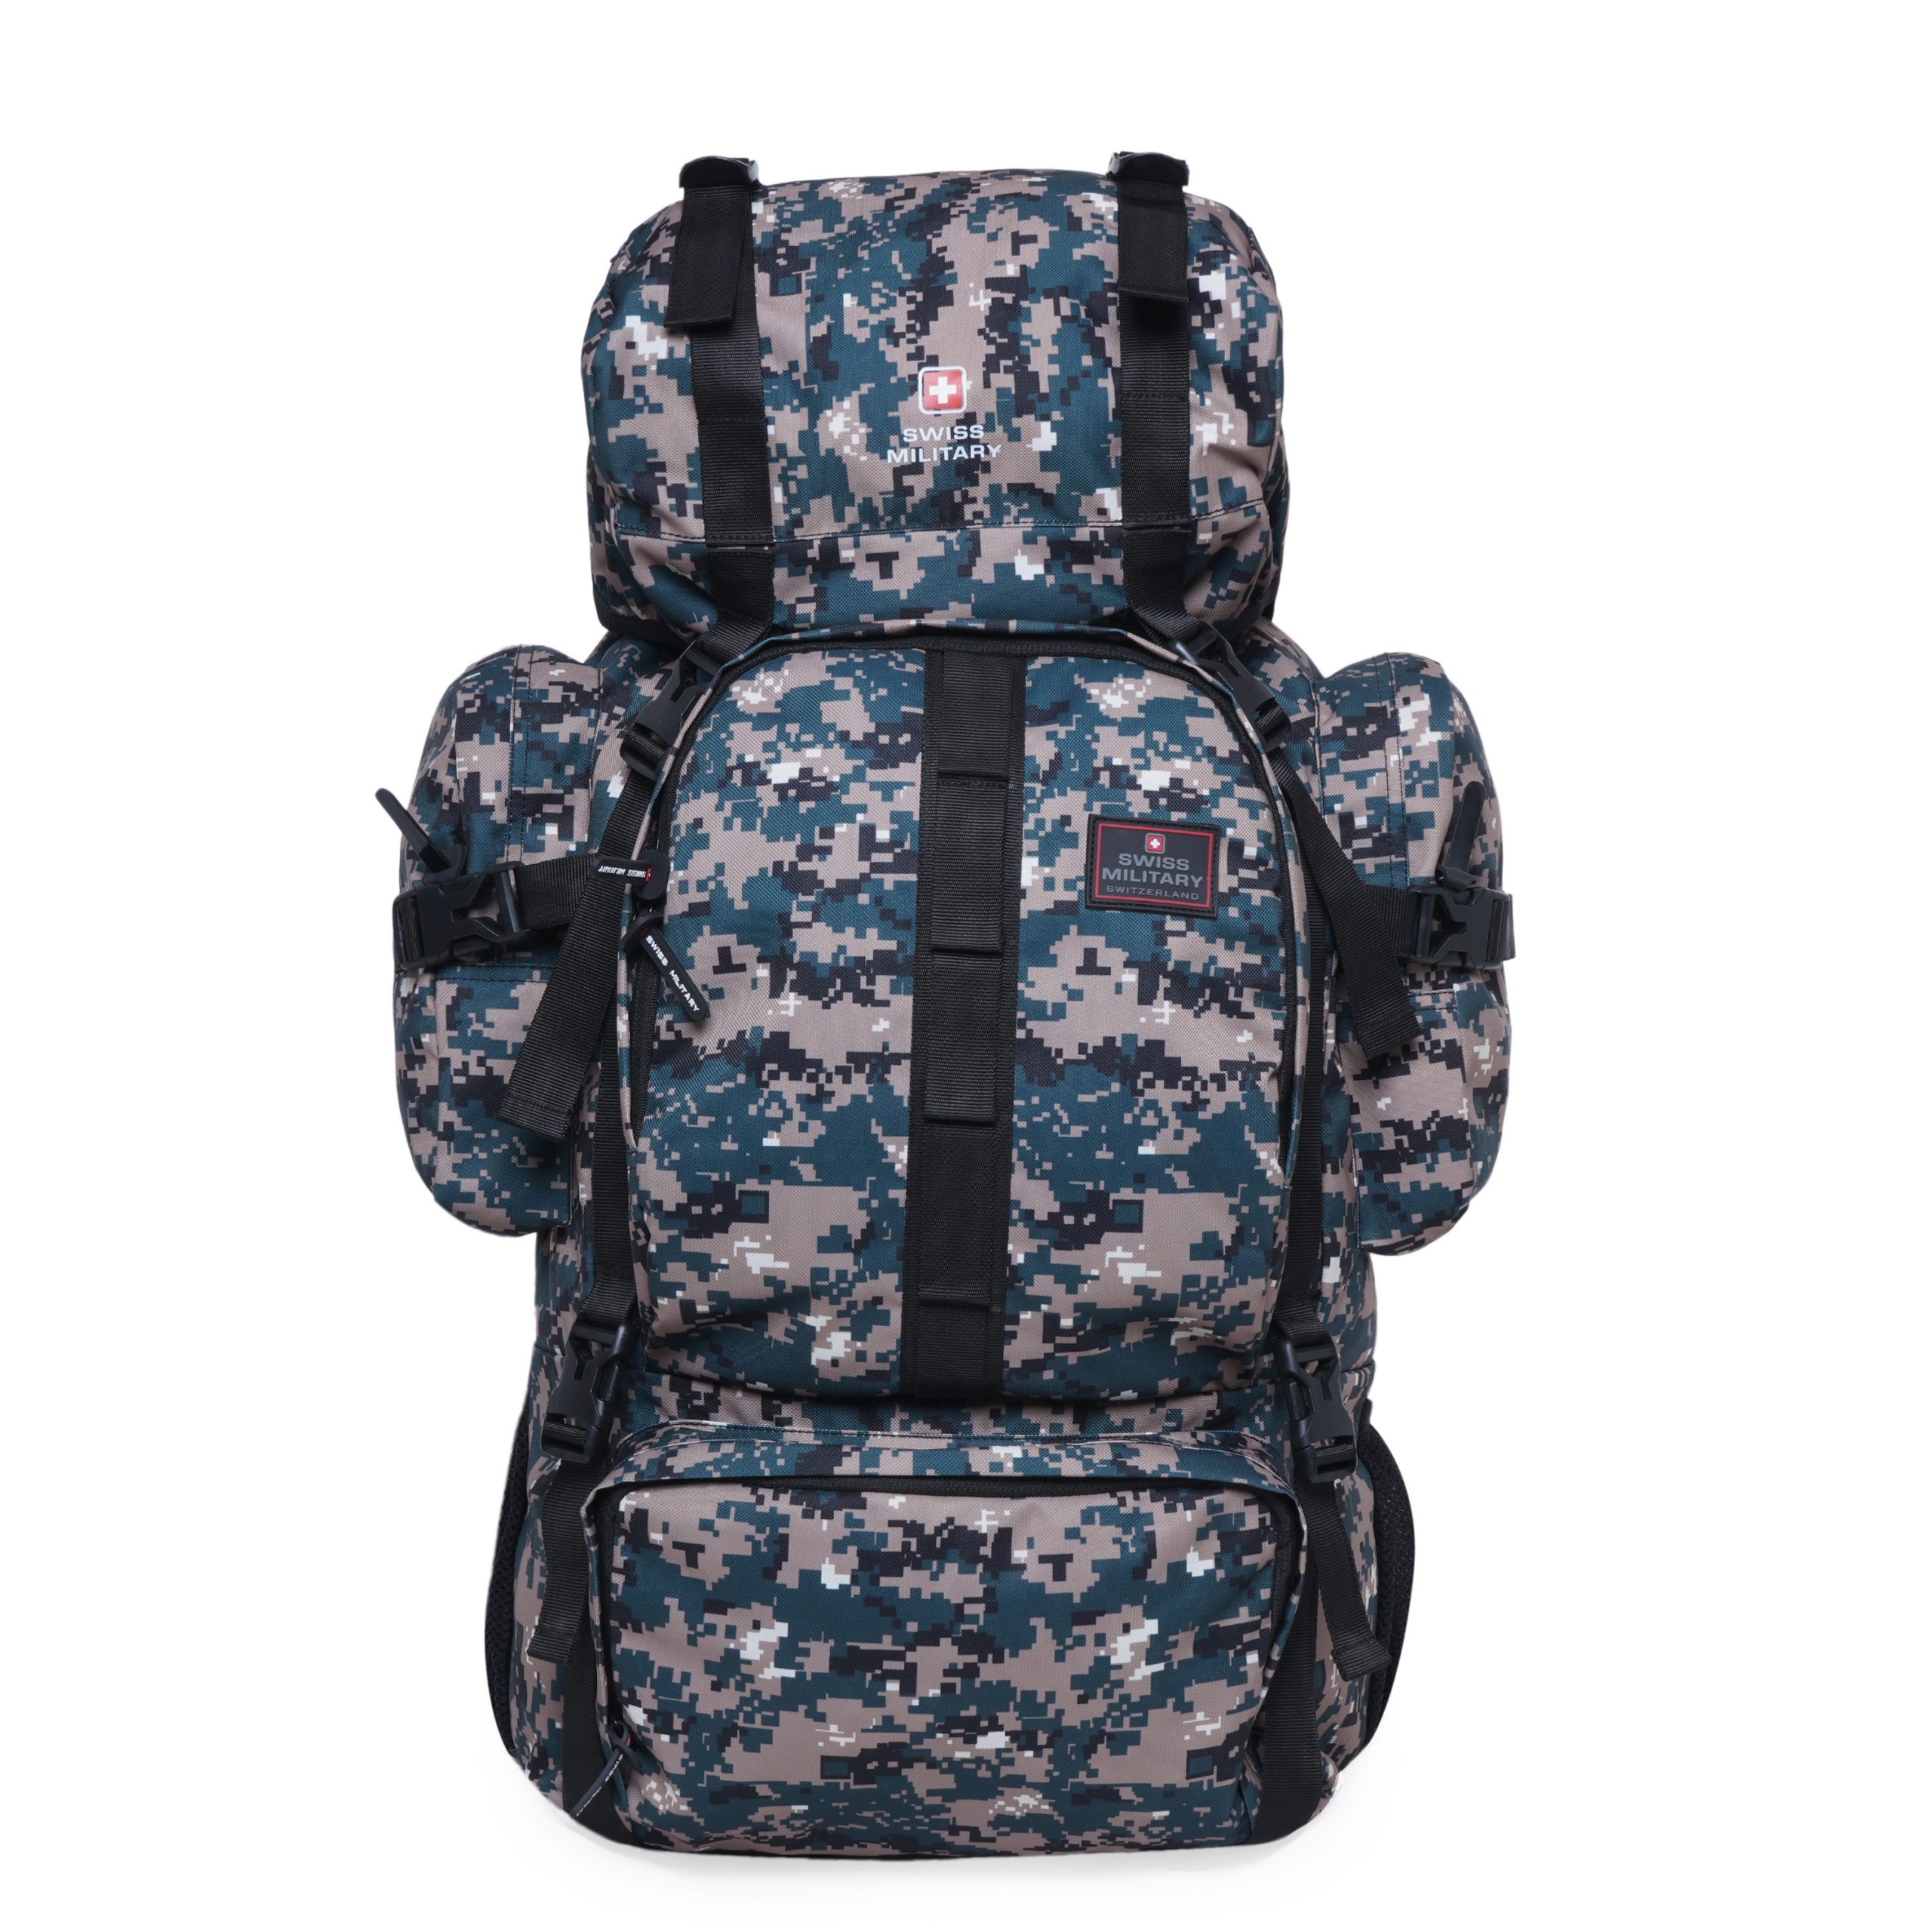 STATE Bags | Kane Kids Backpack Recycled Poly Canvas Camo